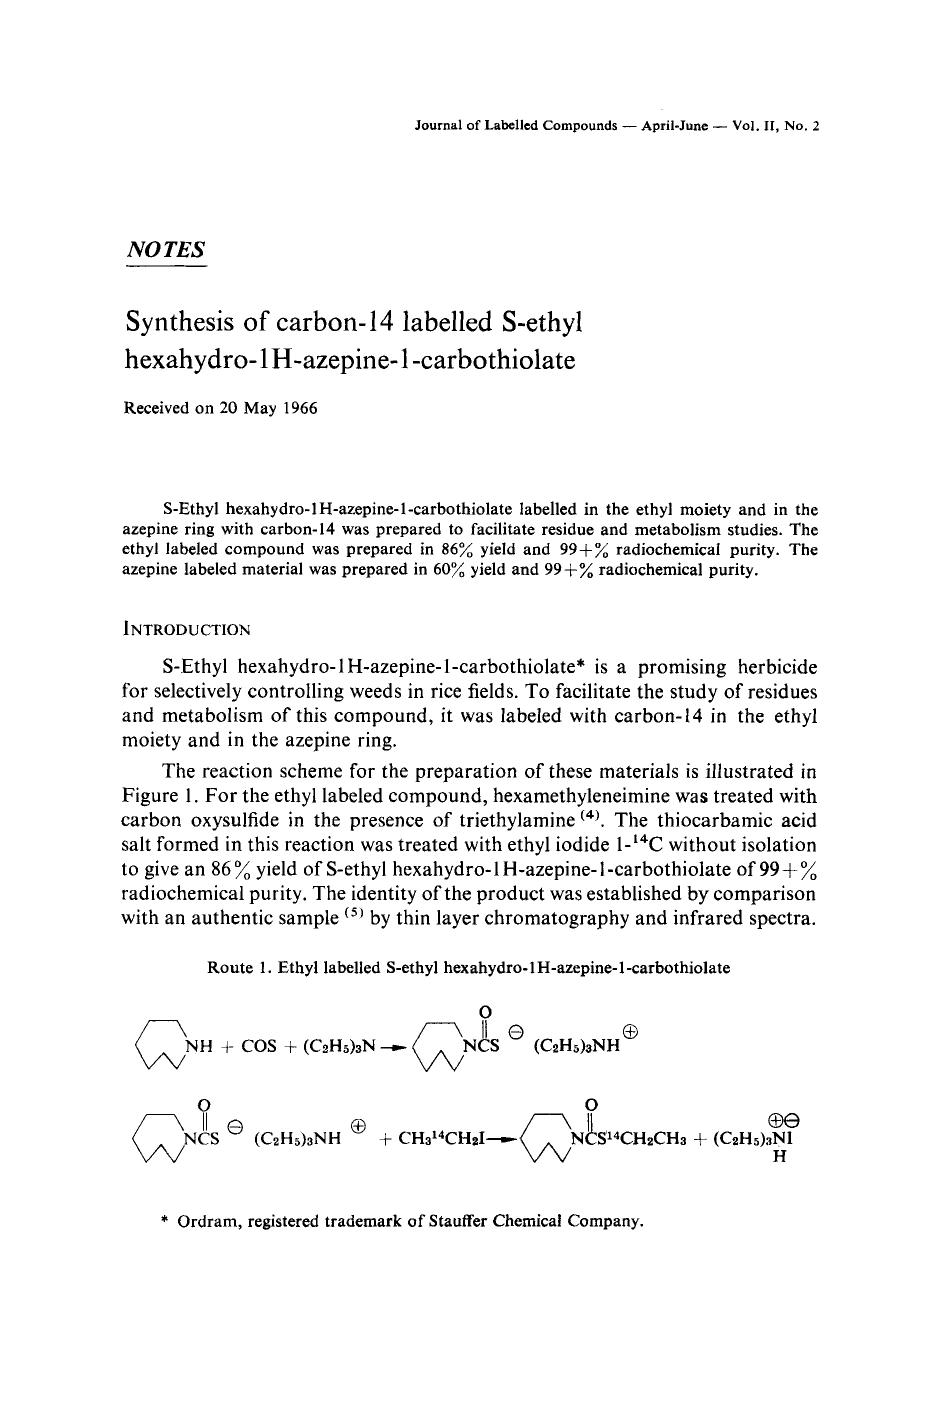 Synthesis of carbon-14 labelled S-ethyl hexahydro-1H-azepine-1-carbothiolate by Unknown